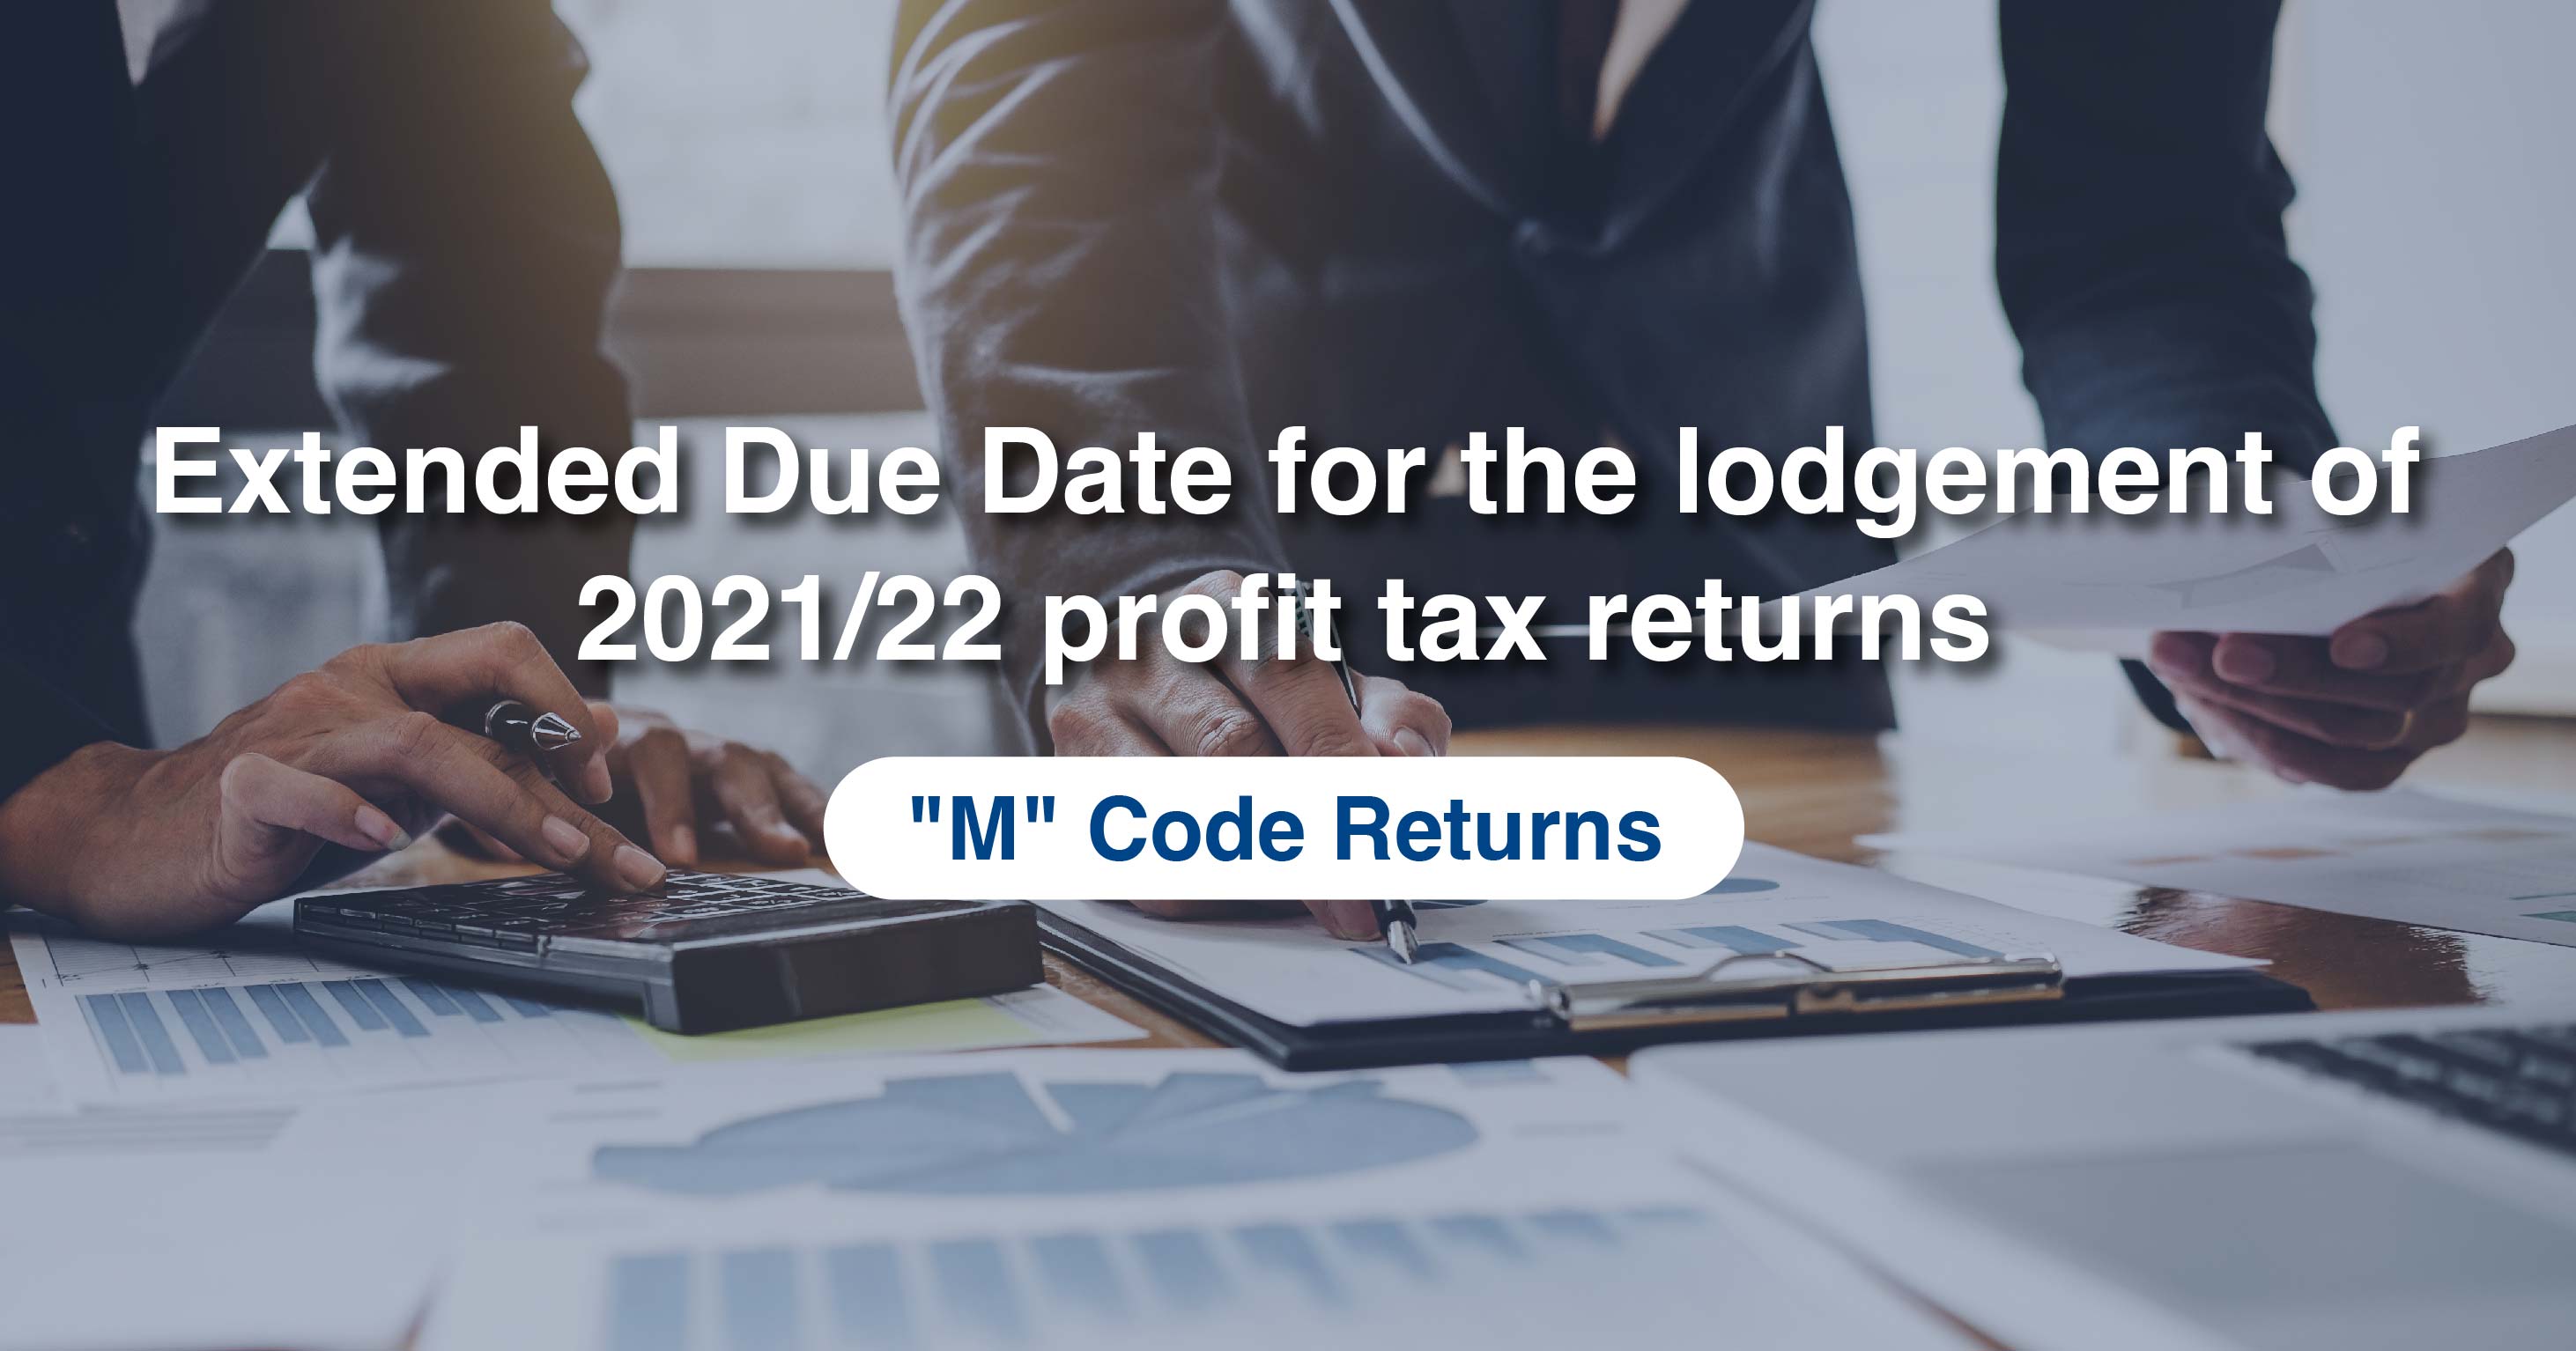 Extended Due Date for "M" Code Returns